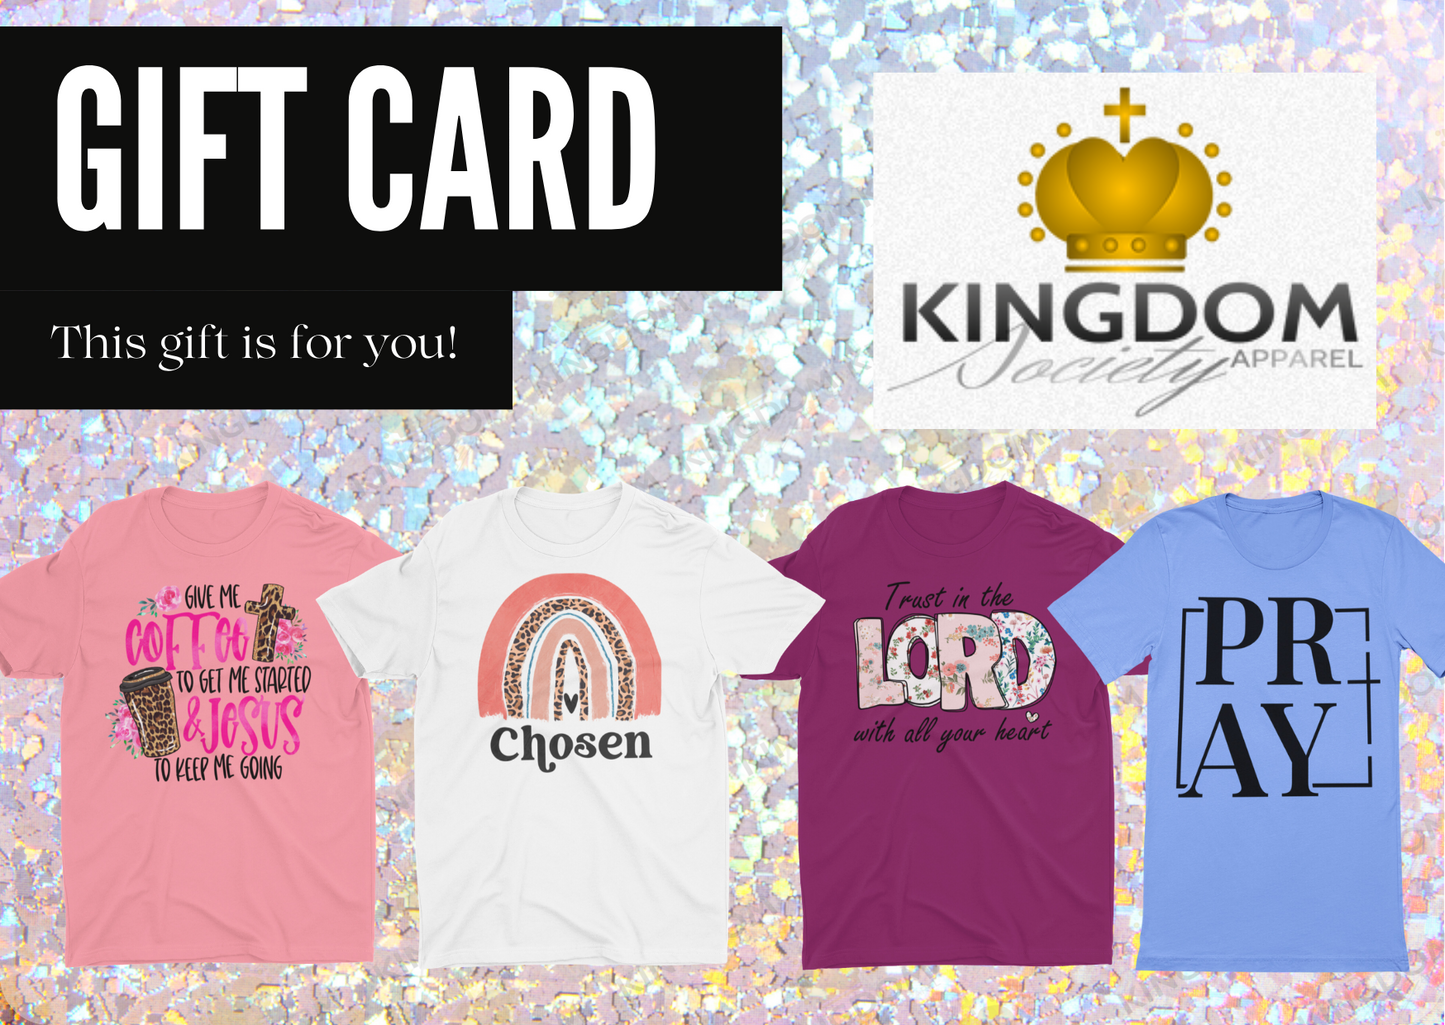 This gift is for you! Gift Card